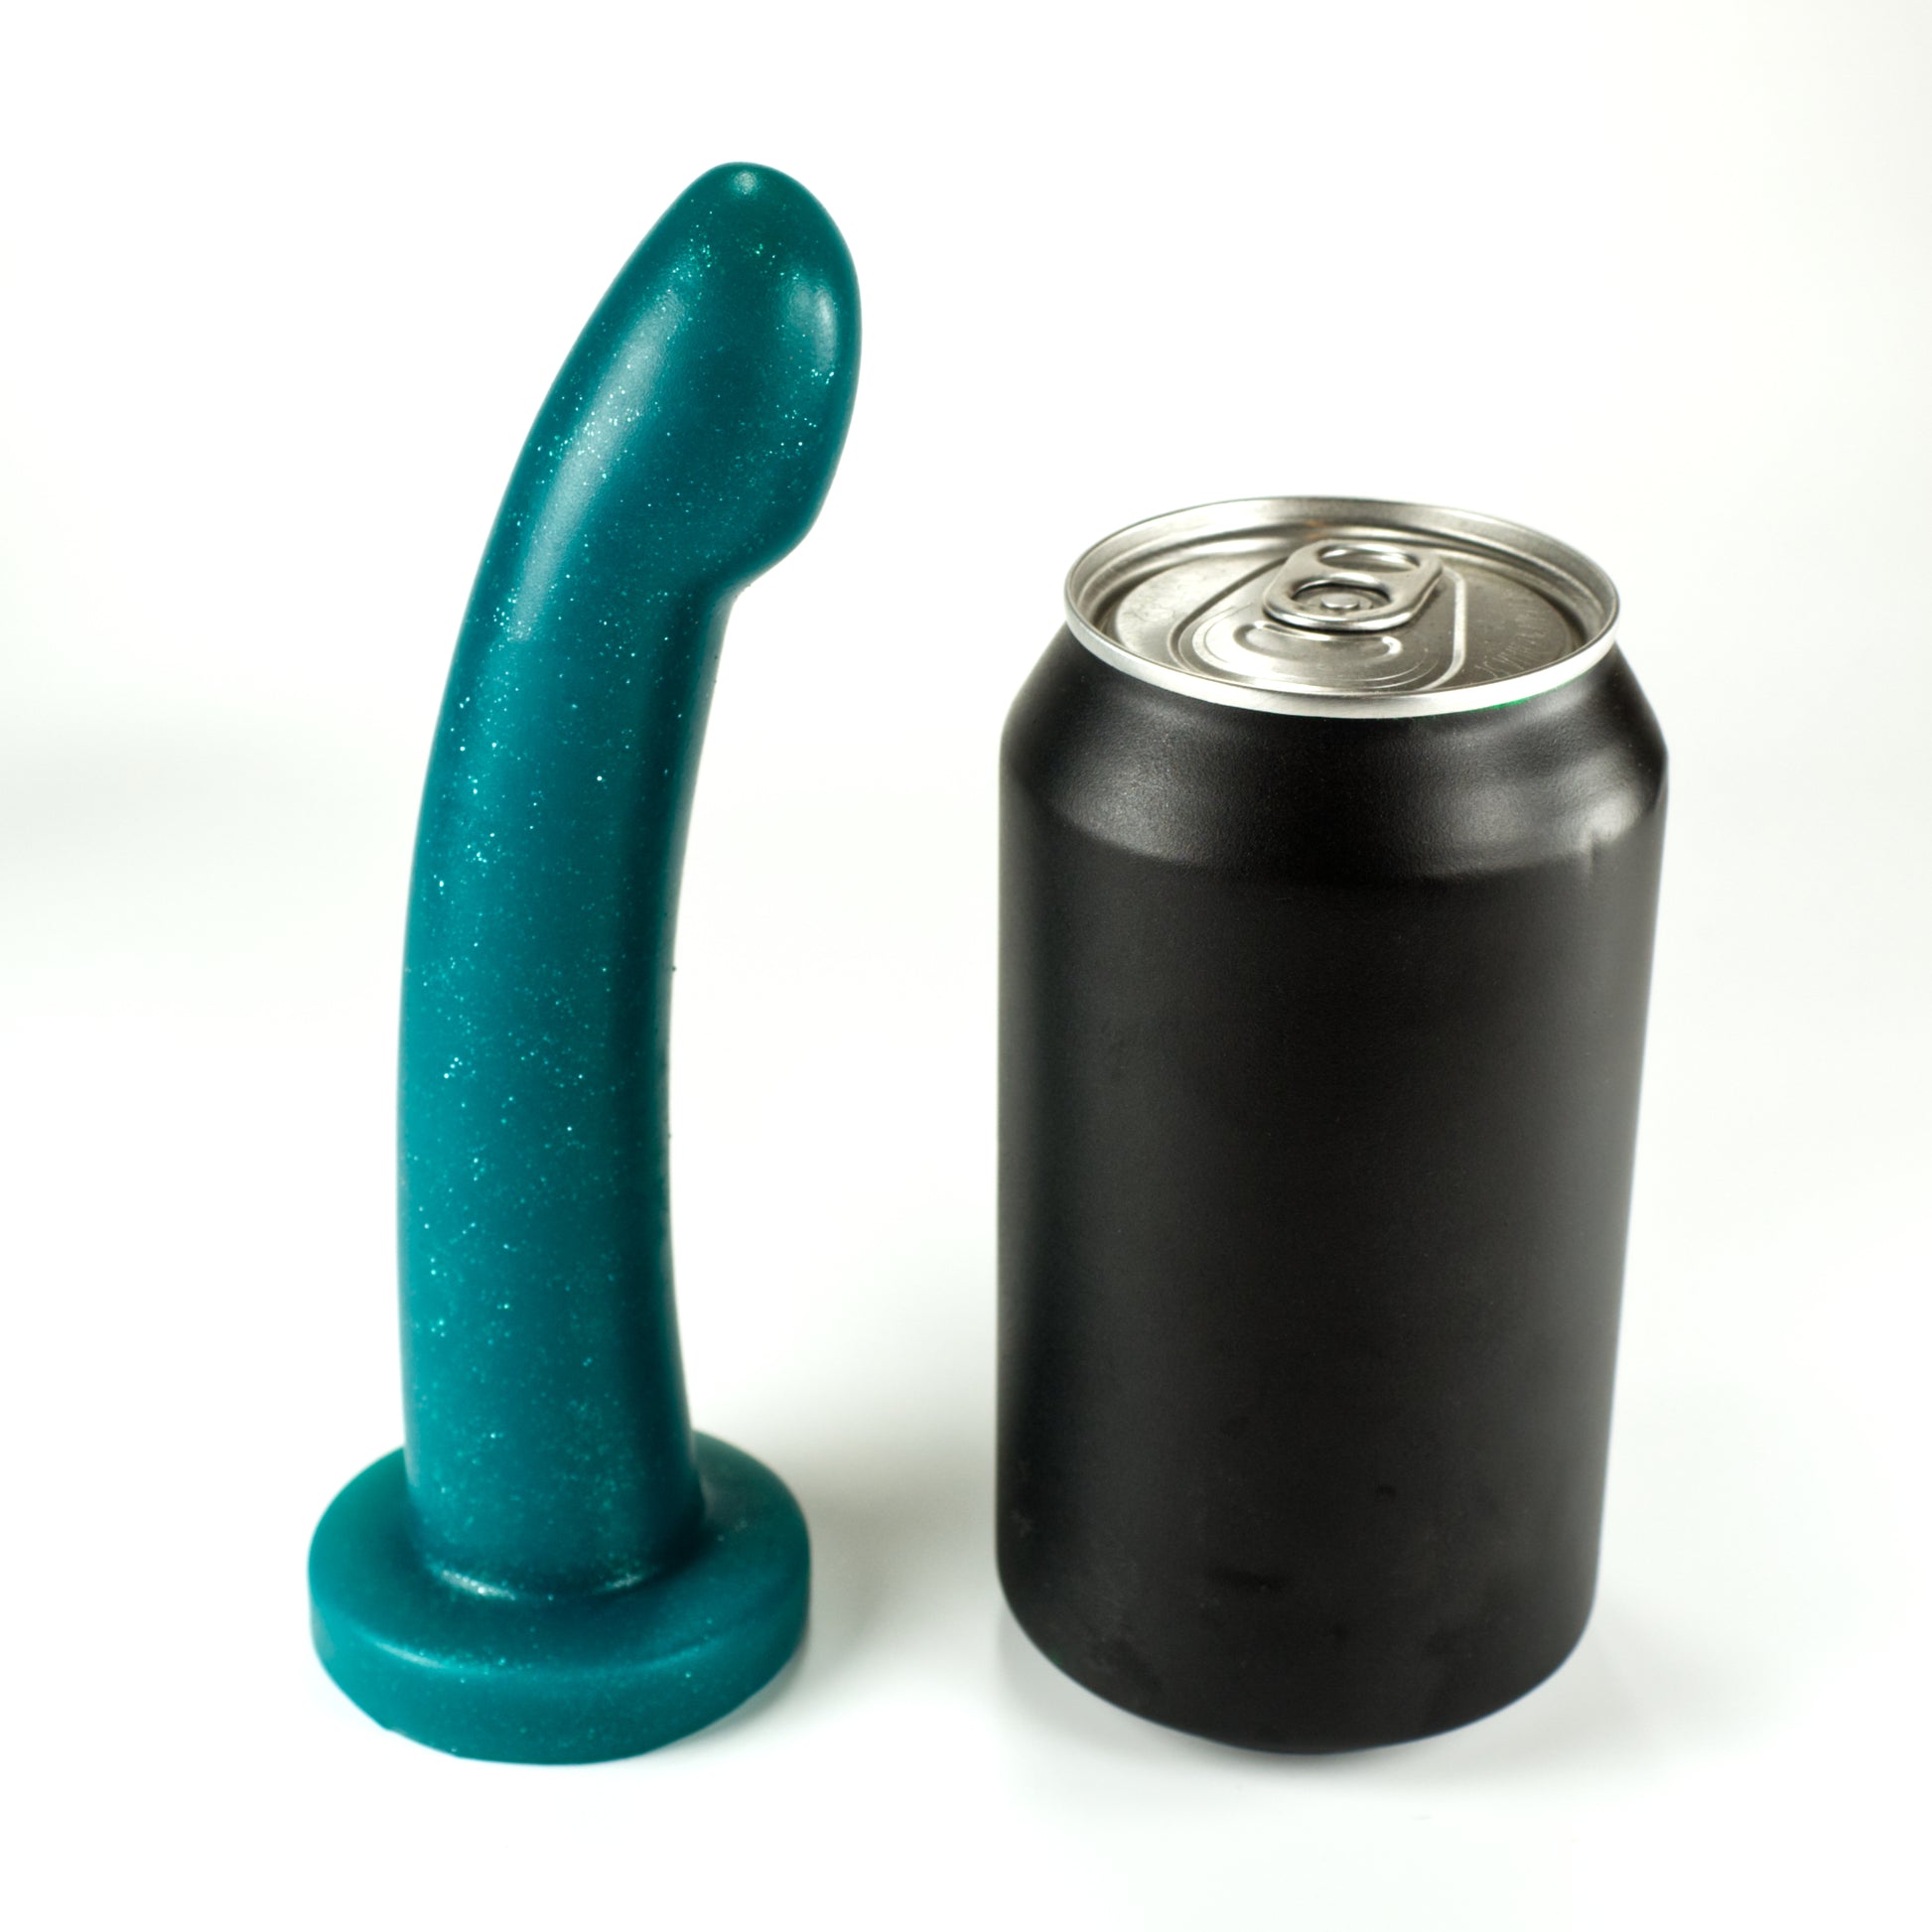 Side view of the Sidekick XS next to a standard soda can, showing that the dildo is a little taller and a little more than a third of the width of the can.